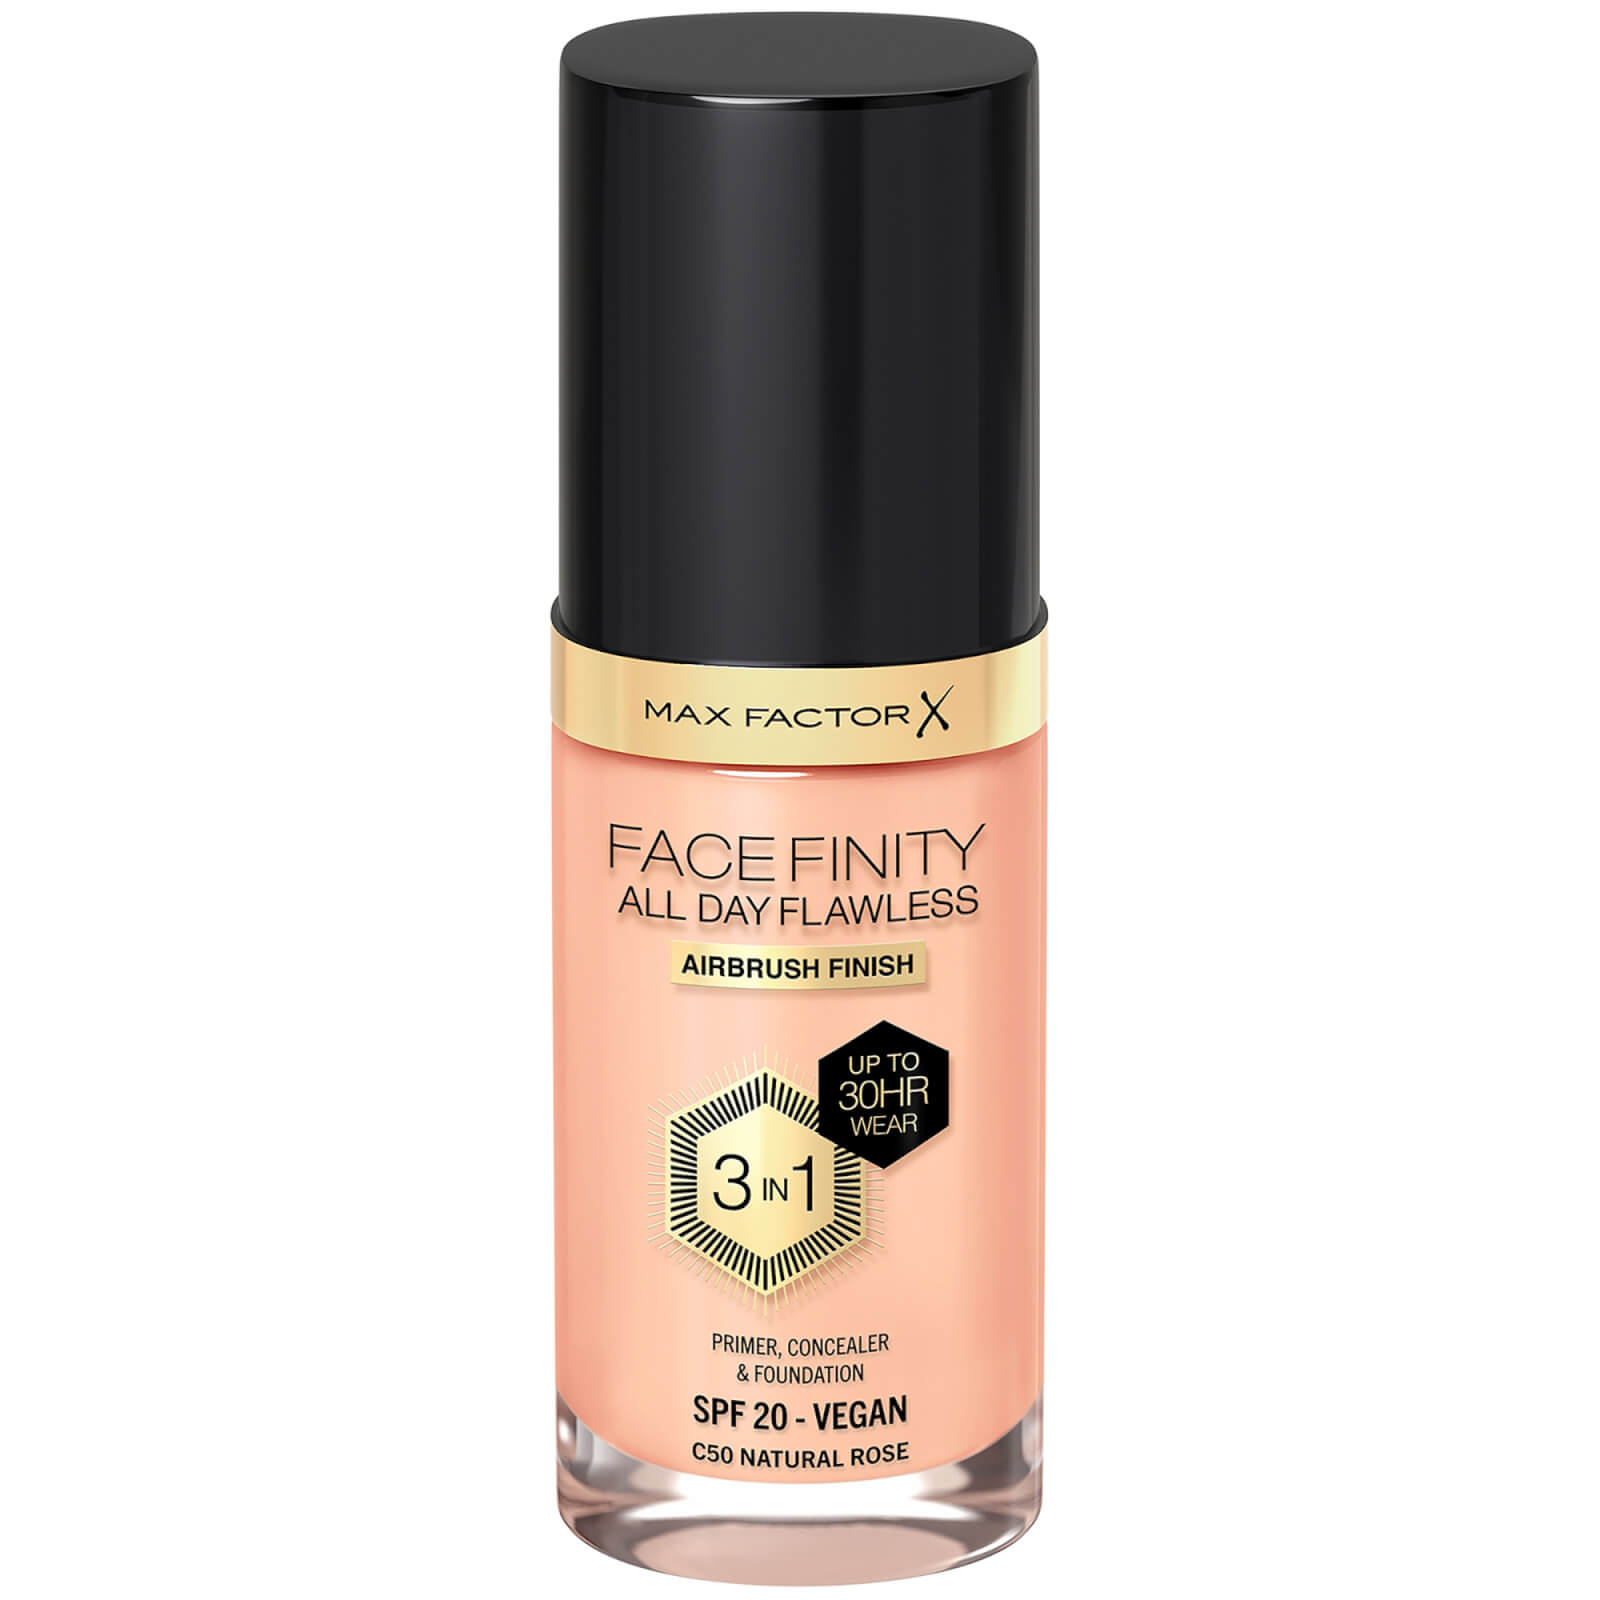 Max Factor Facefinity All Day Flawless 3 in 1 Vegan Foundation 30ml (Various Shades) - C50 - NATURAL ROSE von Max Factor